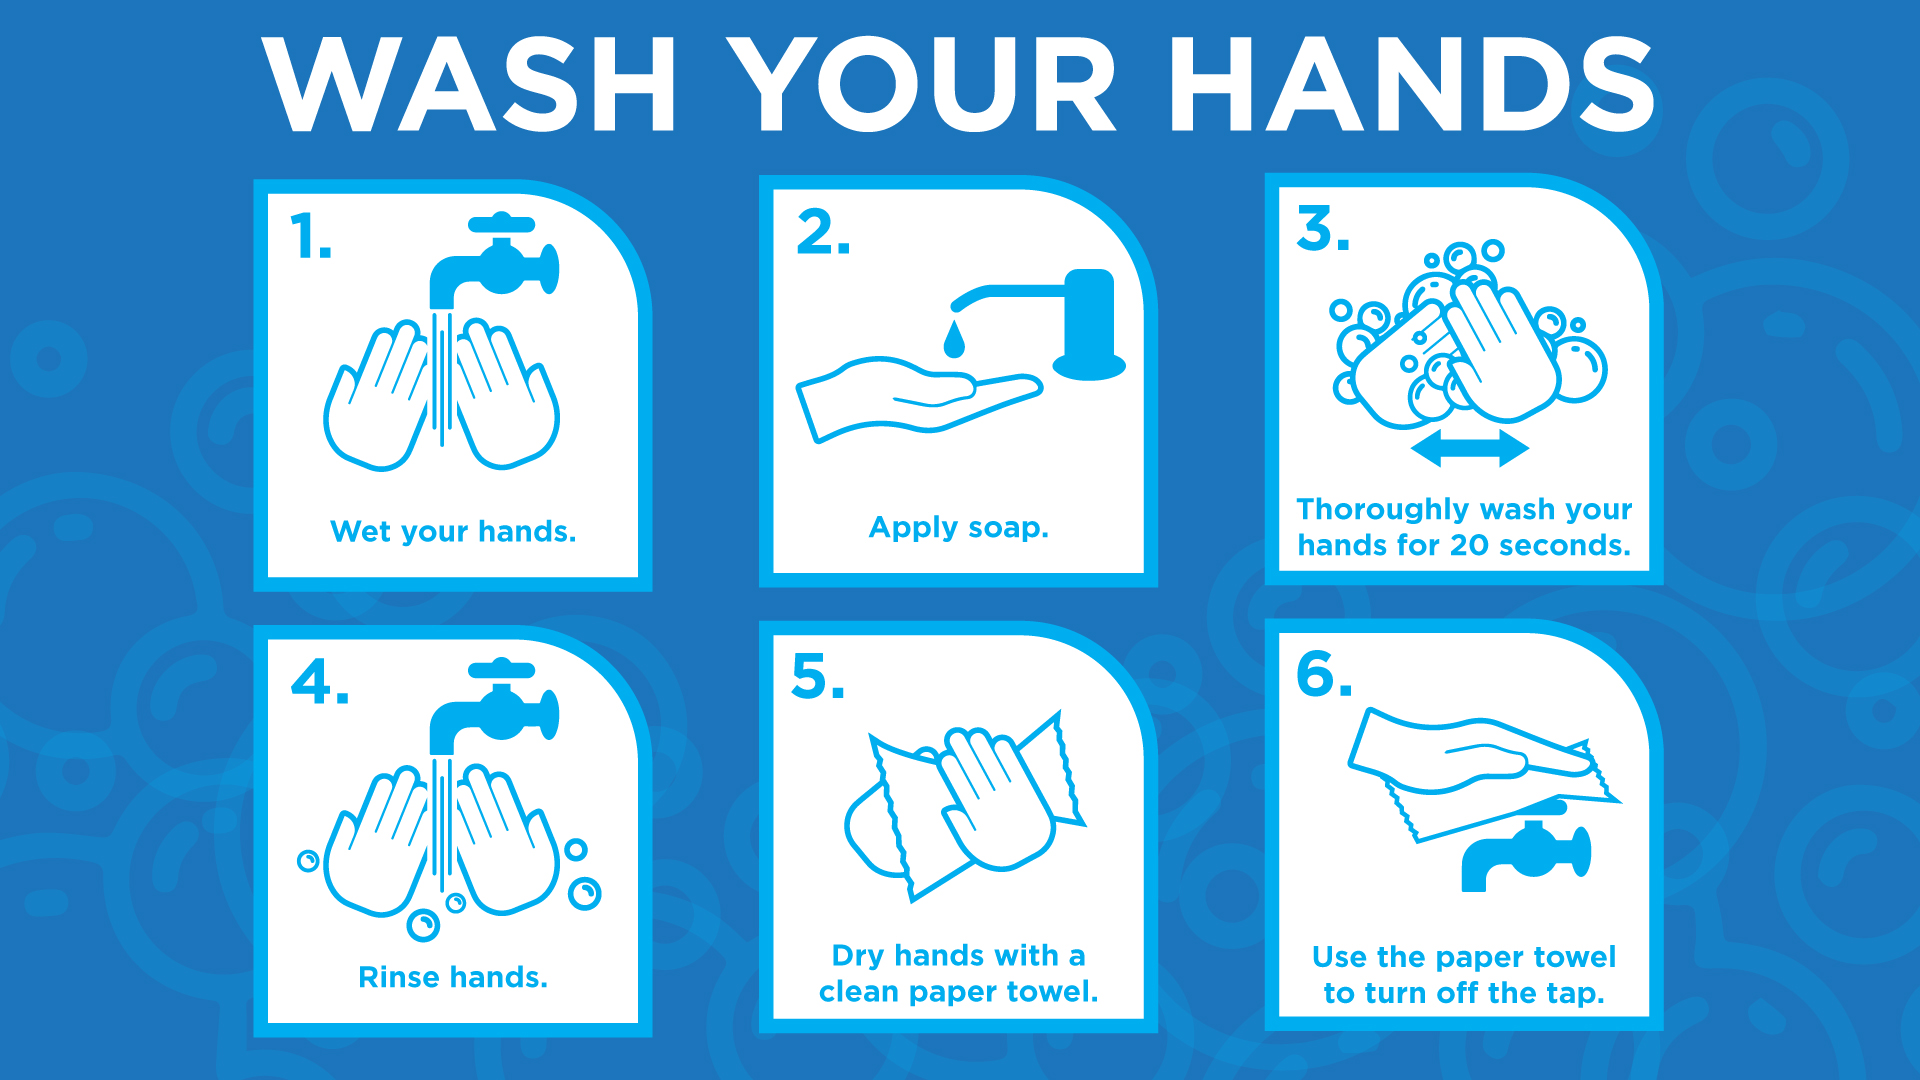 10"X10" Wash Your Hands Decal- 4 pack